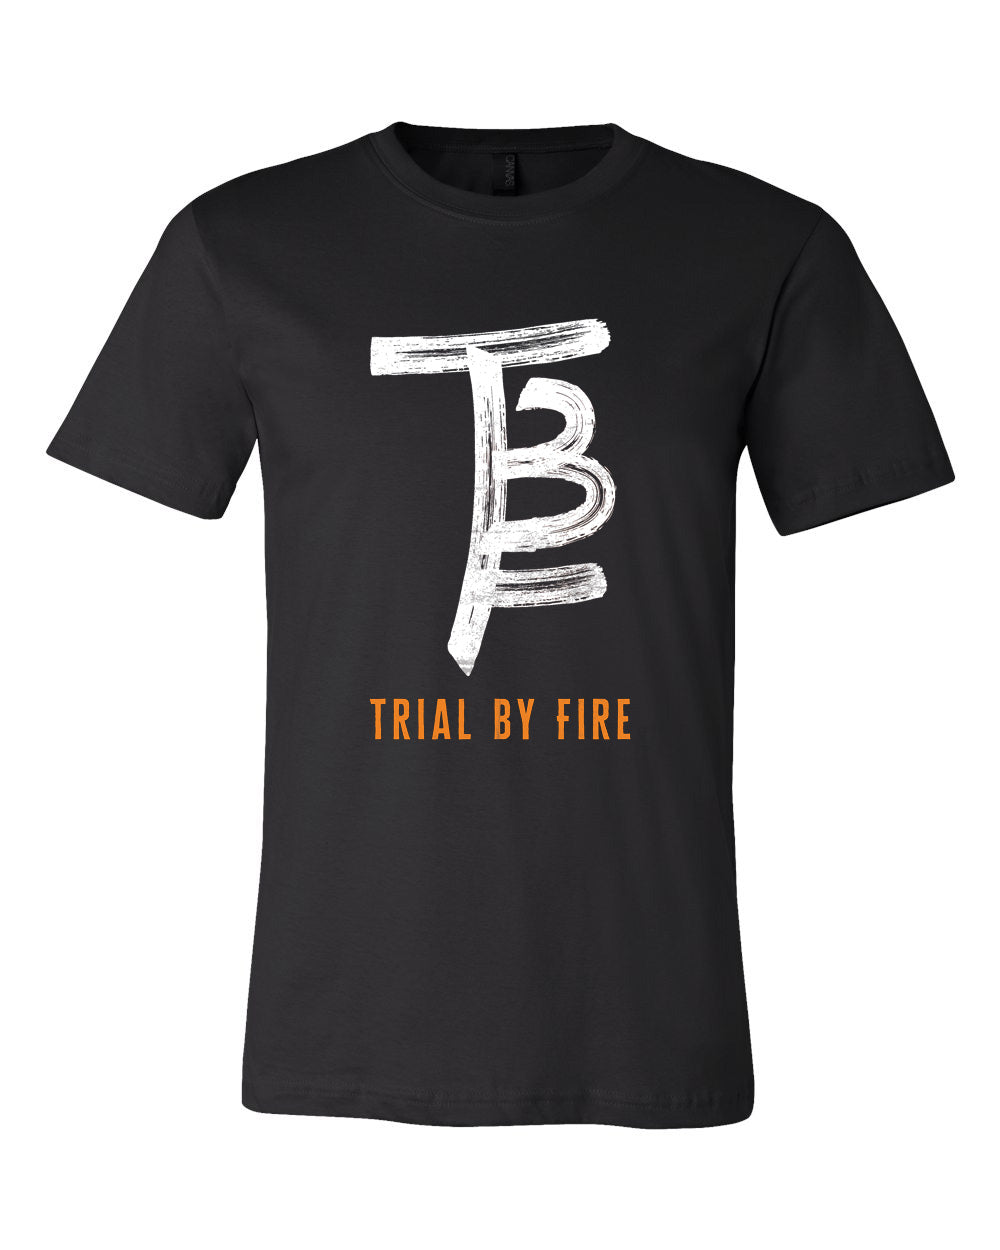 Trial By Fire Unisex Tee